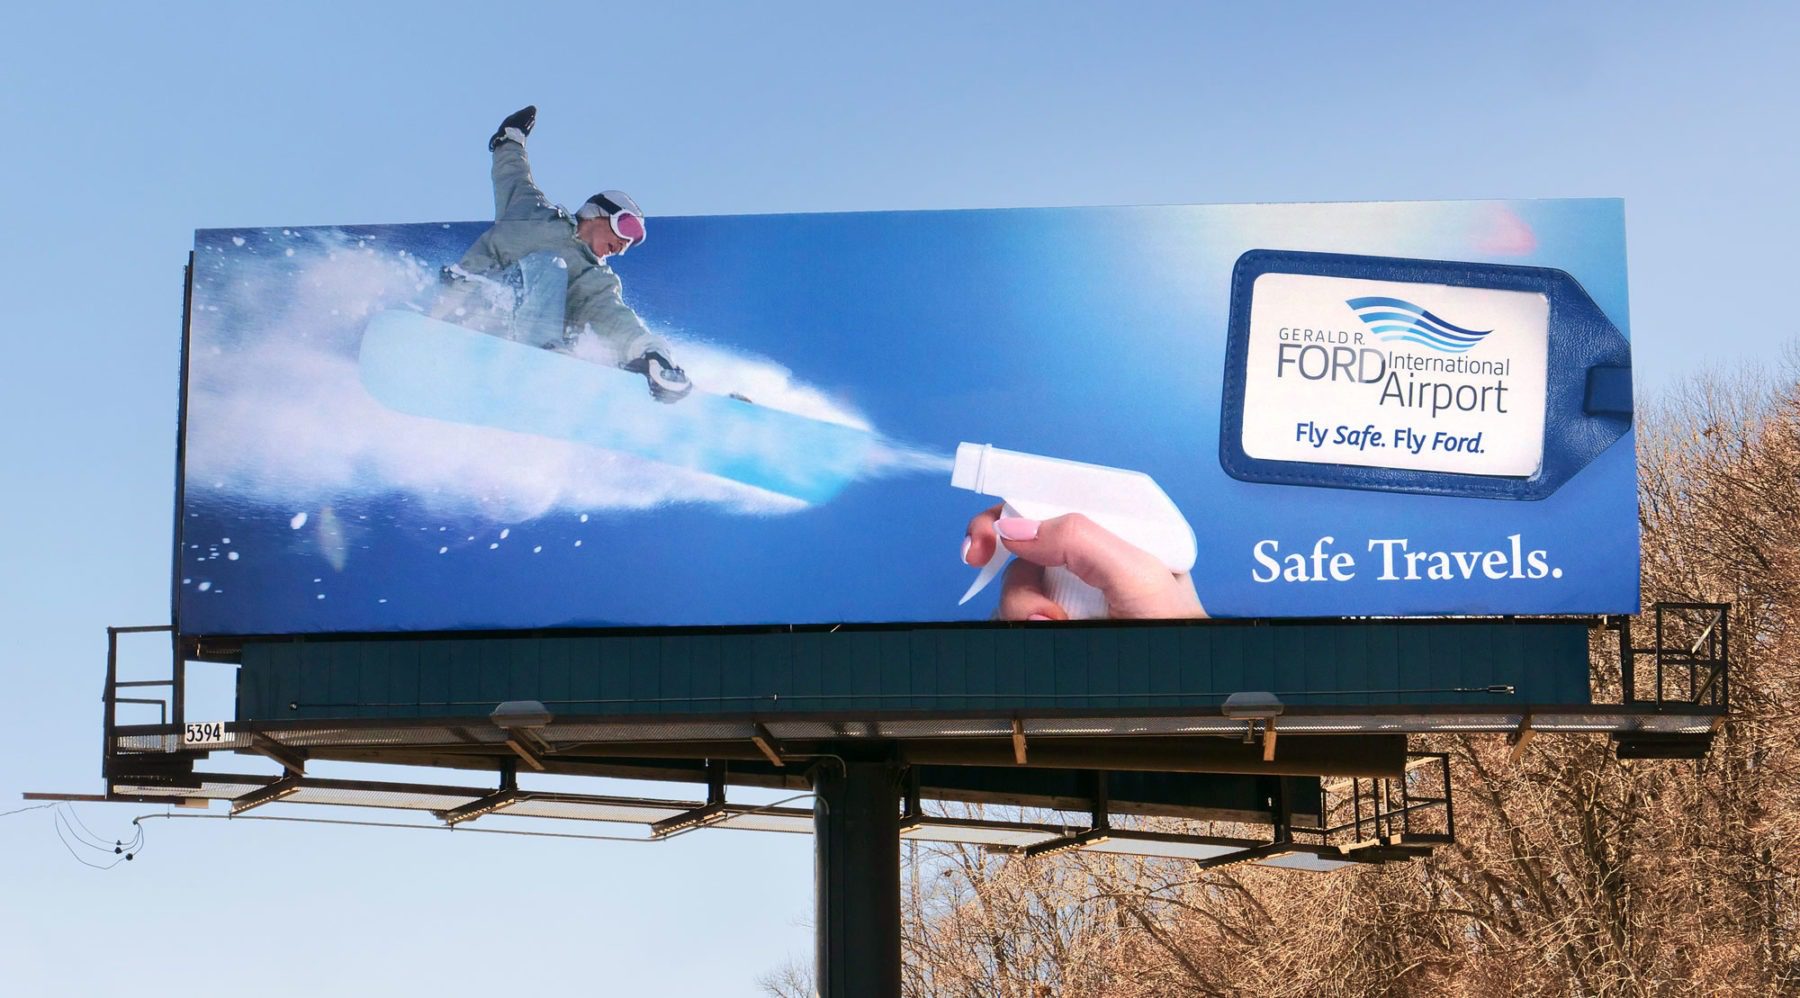 Out of home advertisement showing image of snowboarder riding the spray coming out of a bottle of cleaner.